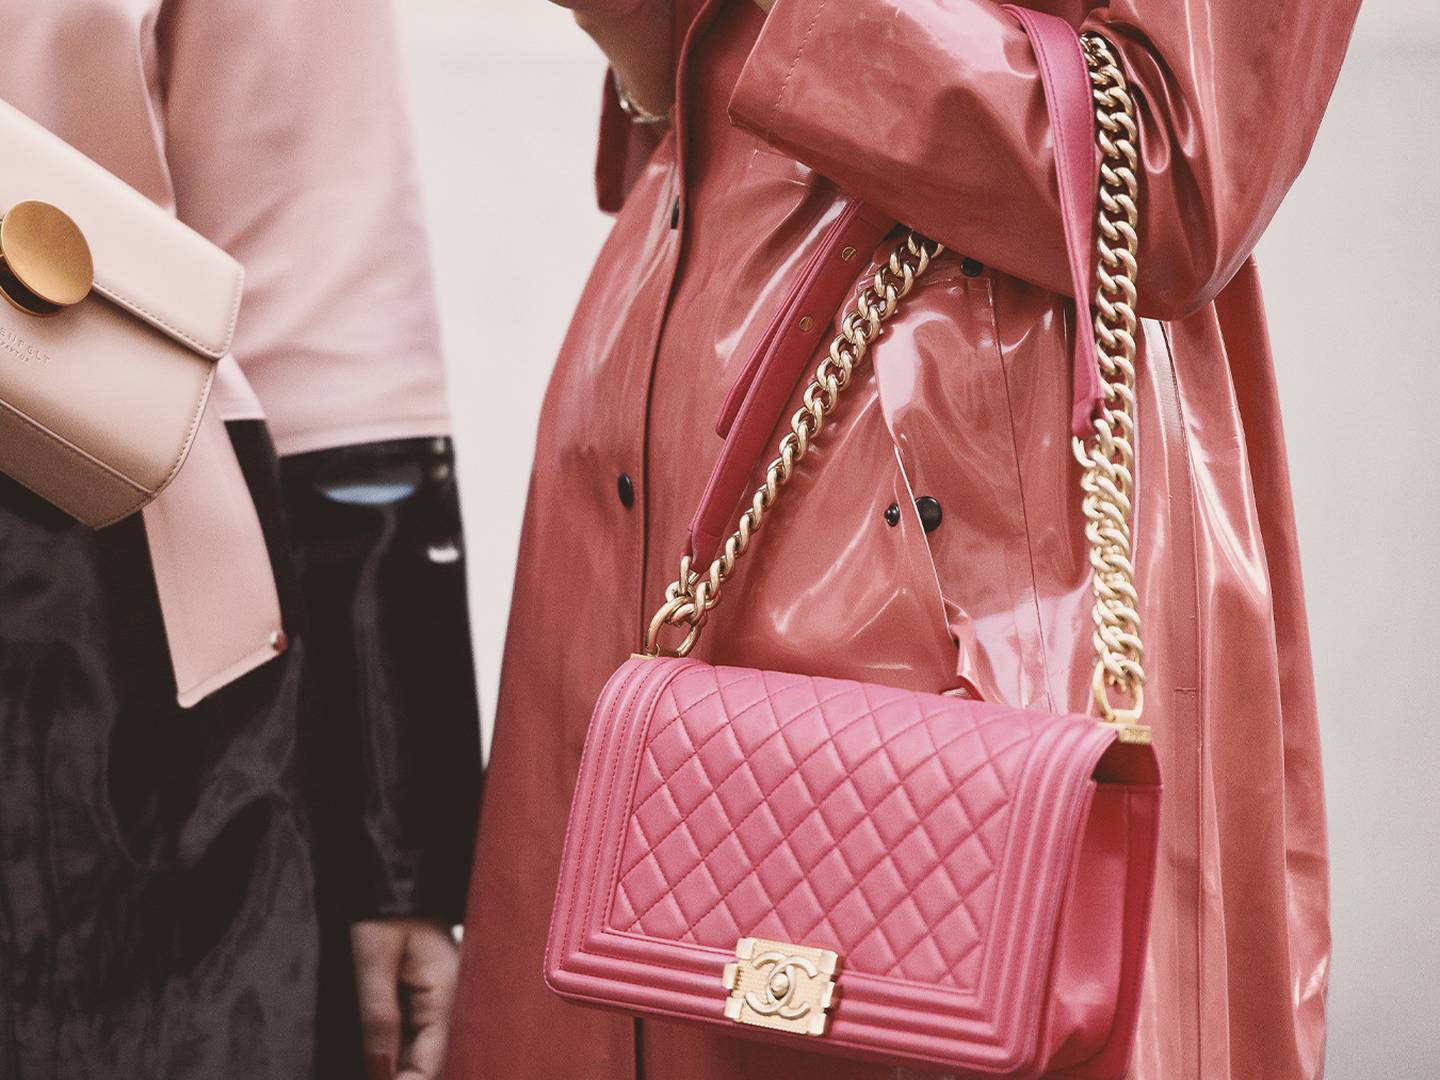 Chanel Is Aiming for Hermès Status With Handbag Price Hikes